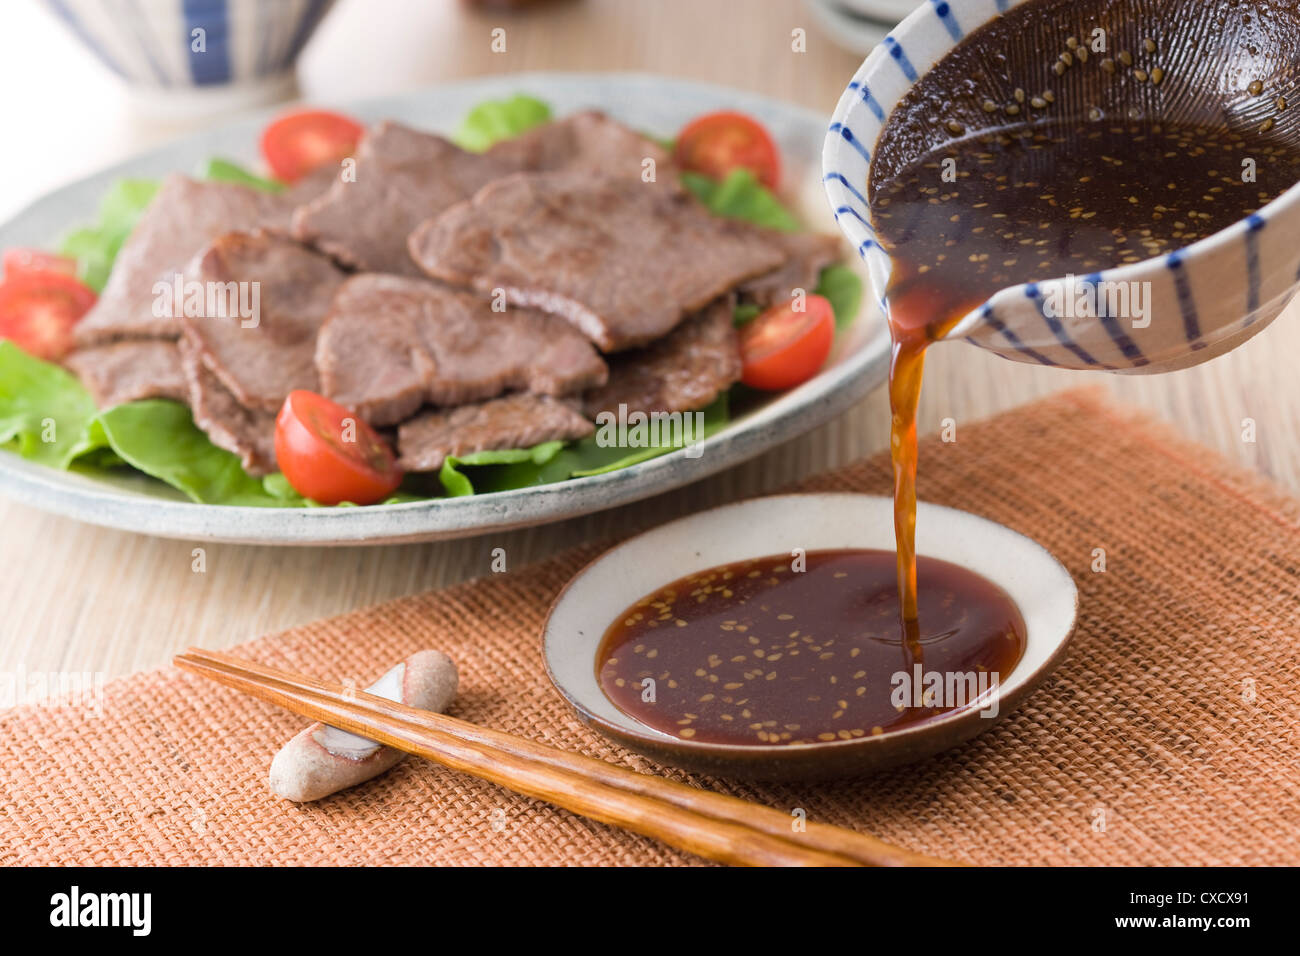 Pouring Korean Barbeque Sauce into Plate Stock Photo